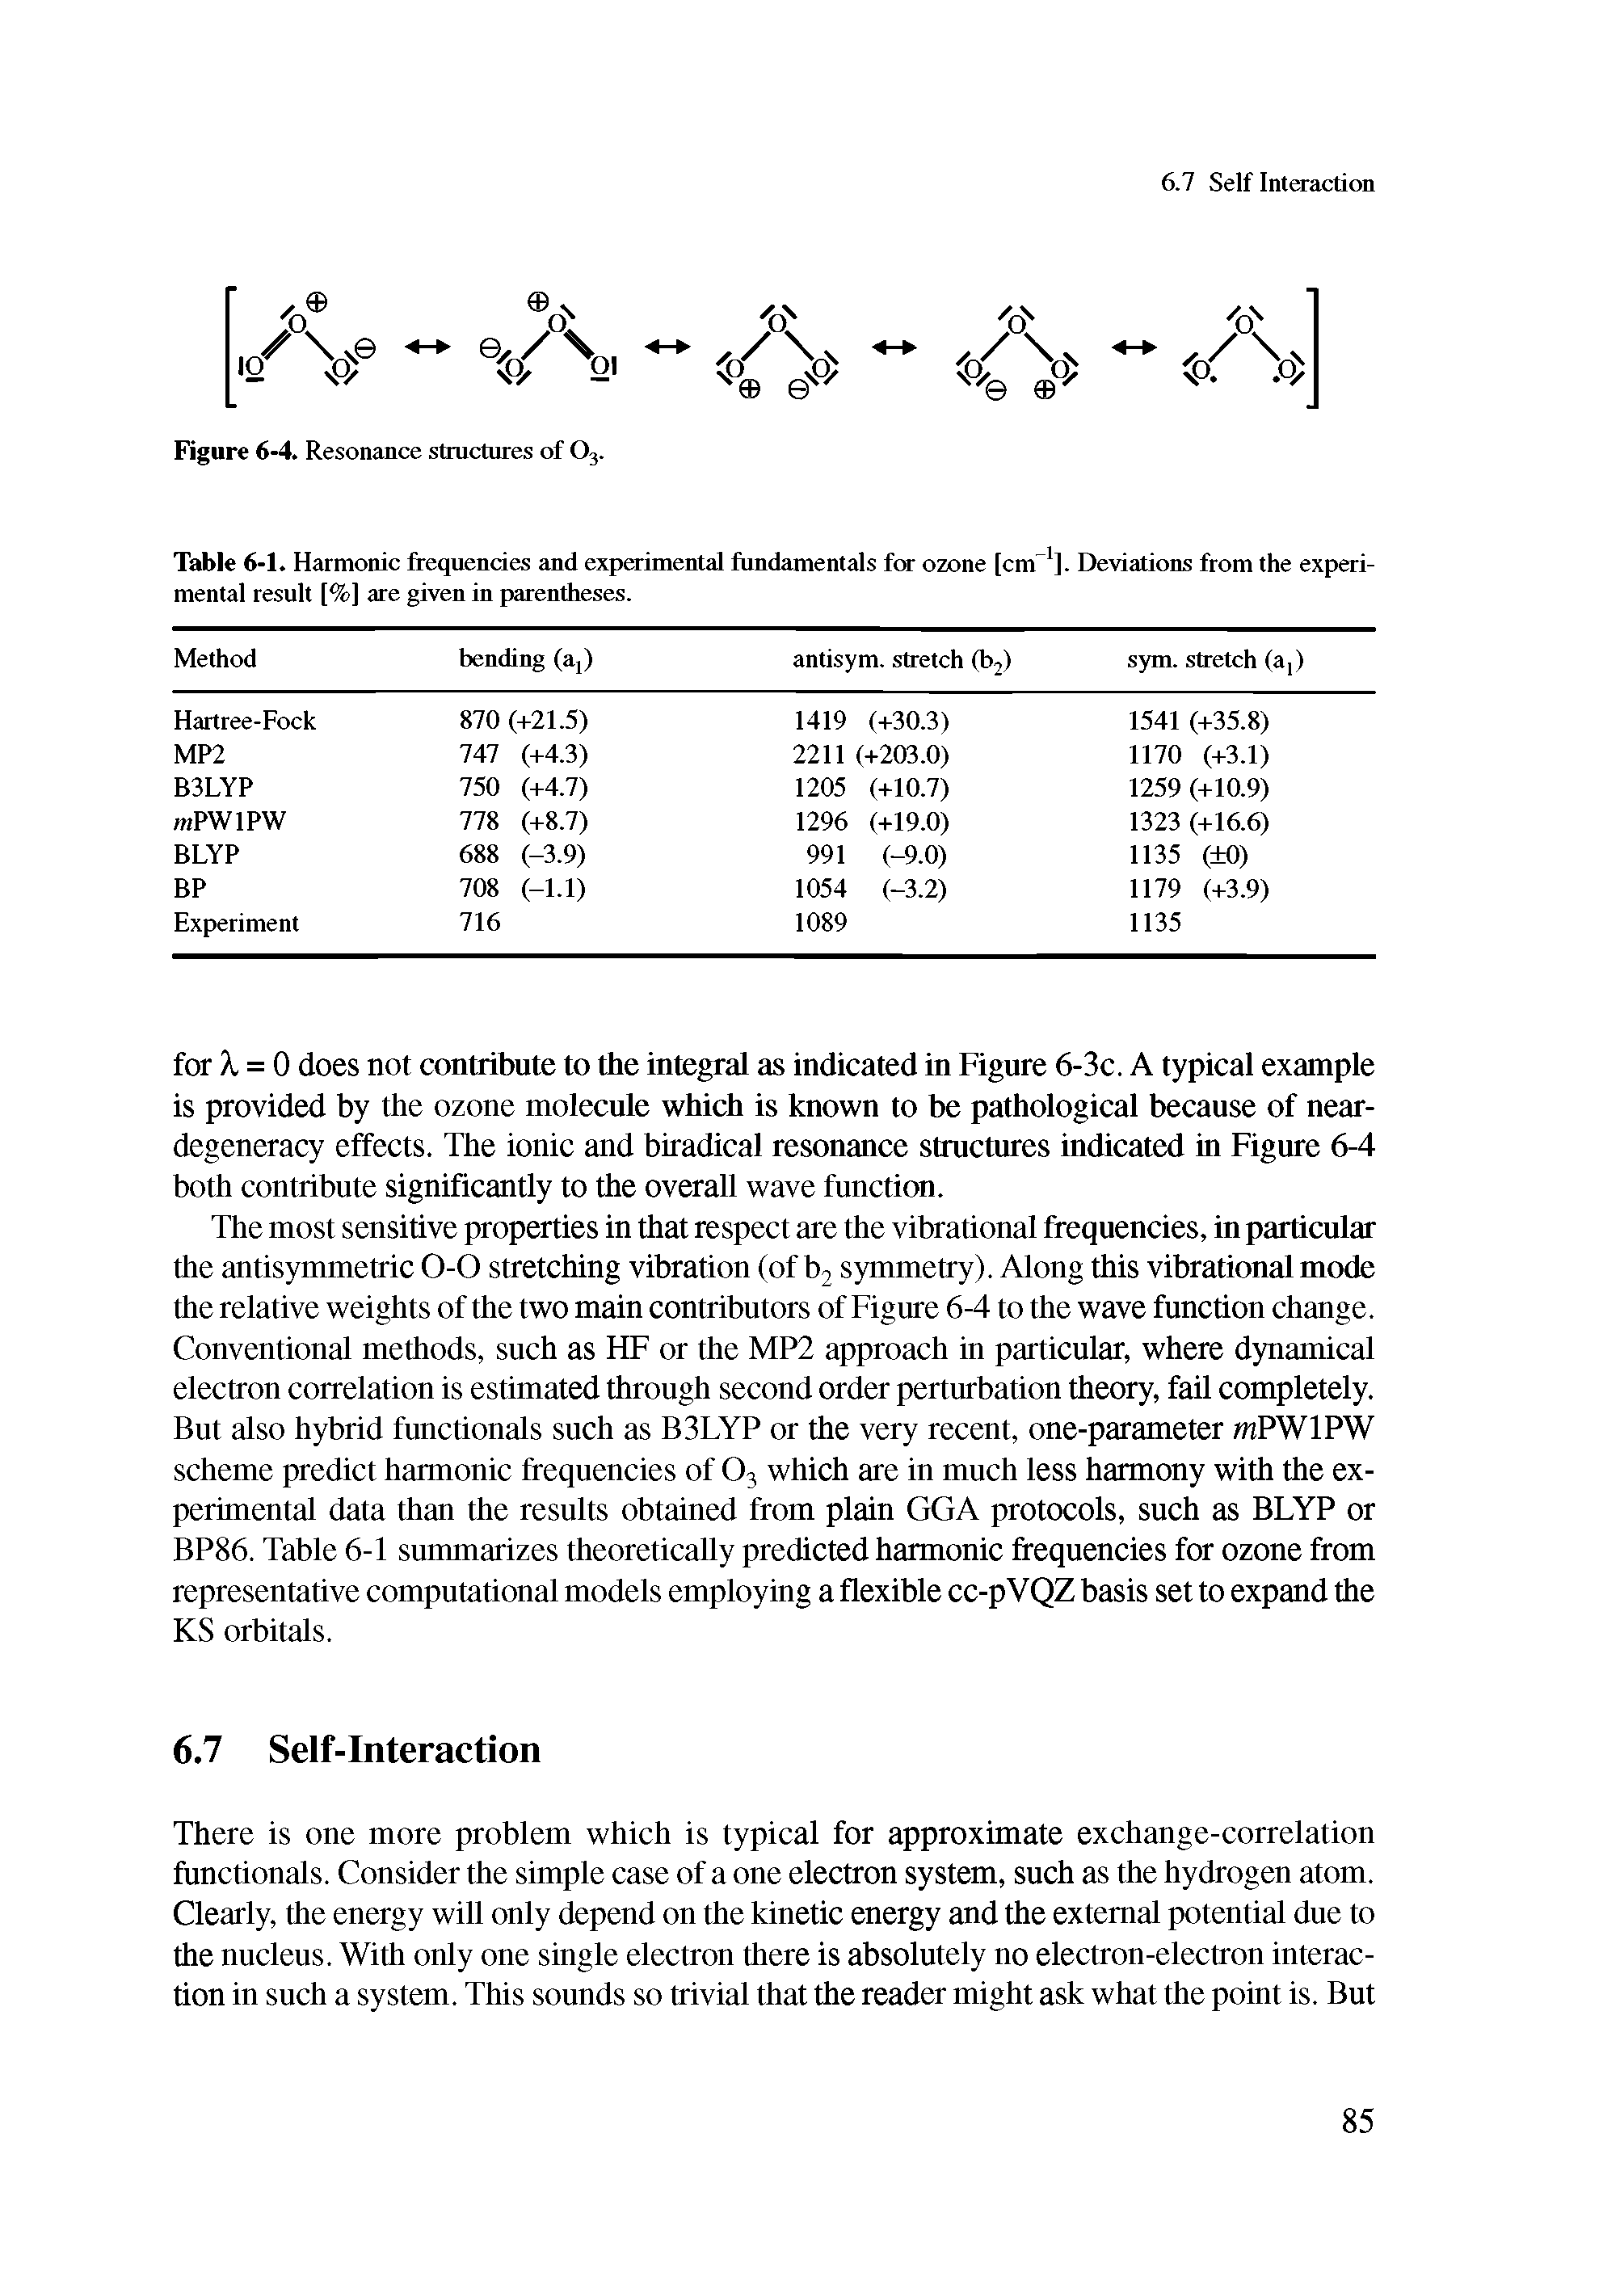 Table 6-1. Harmonic frequencies and experimental fundamentals for ozone [cm 11. Deviations from the experimental result [%] are given in parentheses.